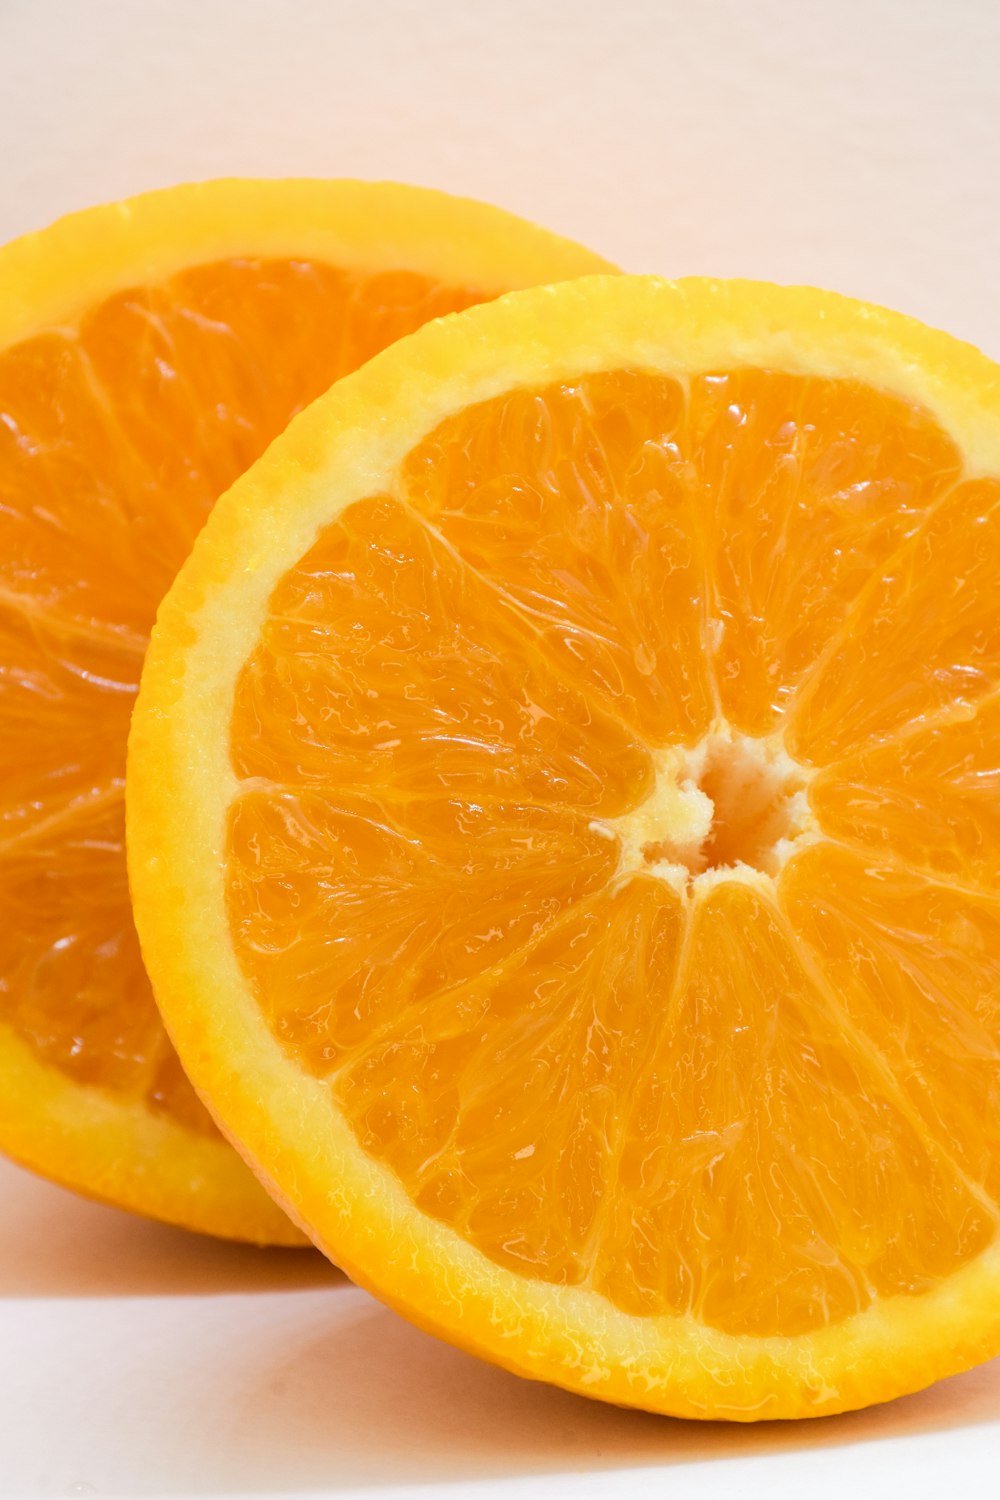 two halves of an orange on a white background